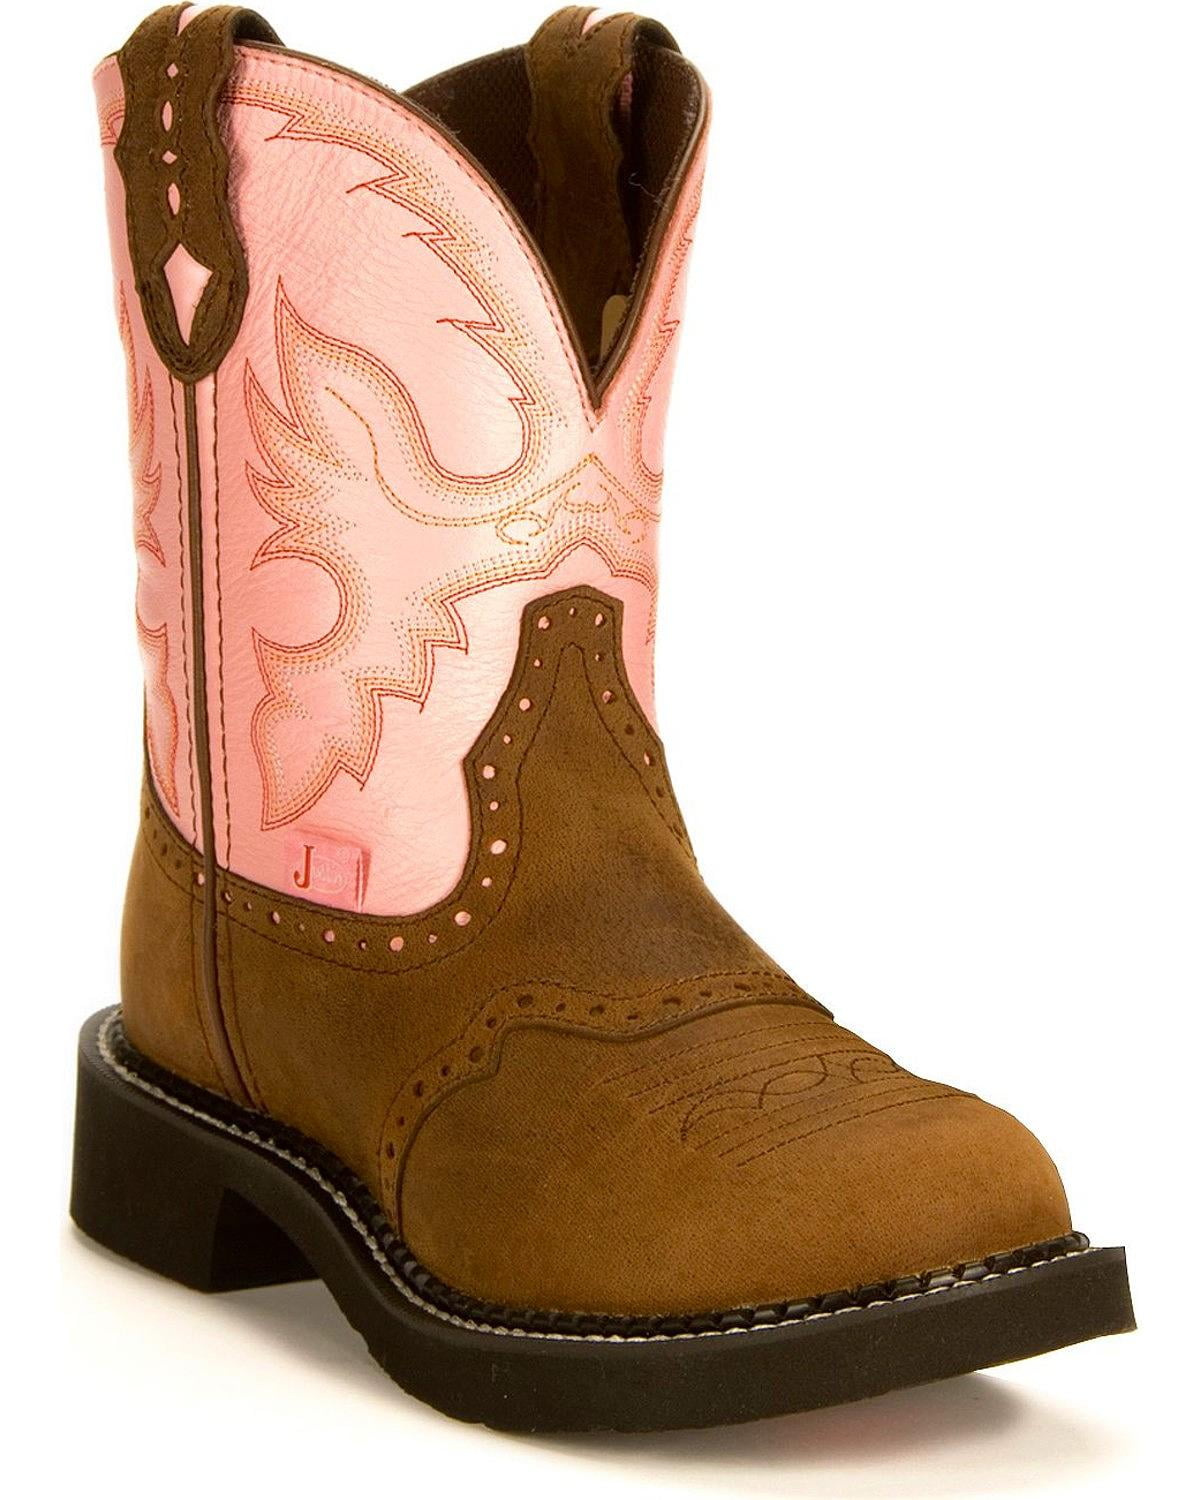 Justin Boots - Justin Gypsy Collection 8